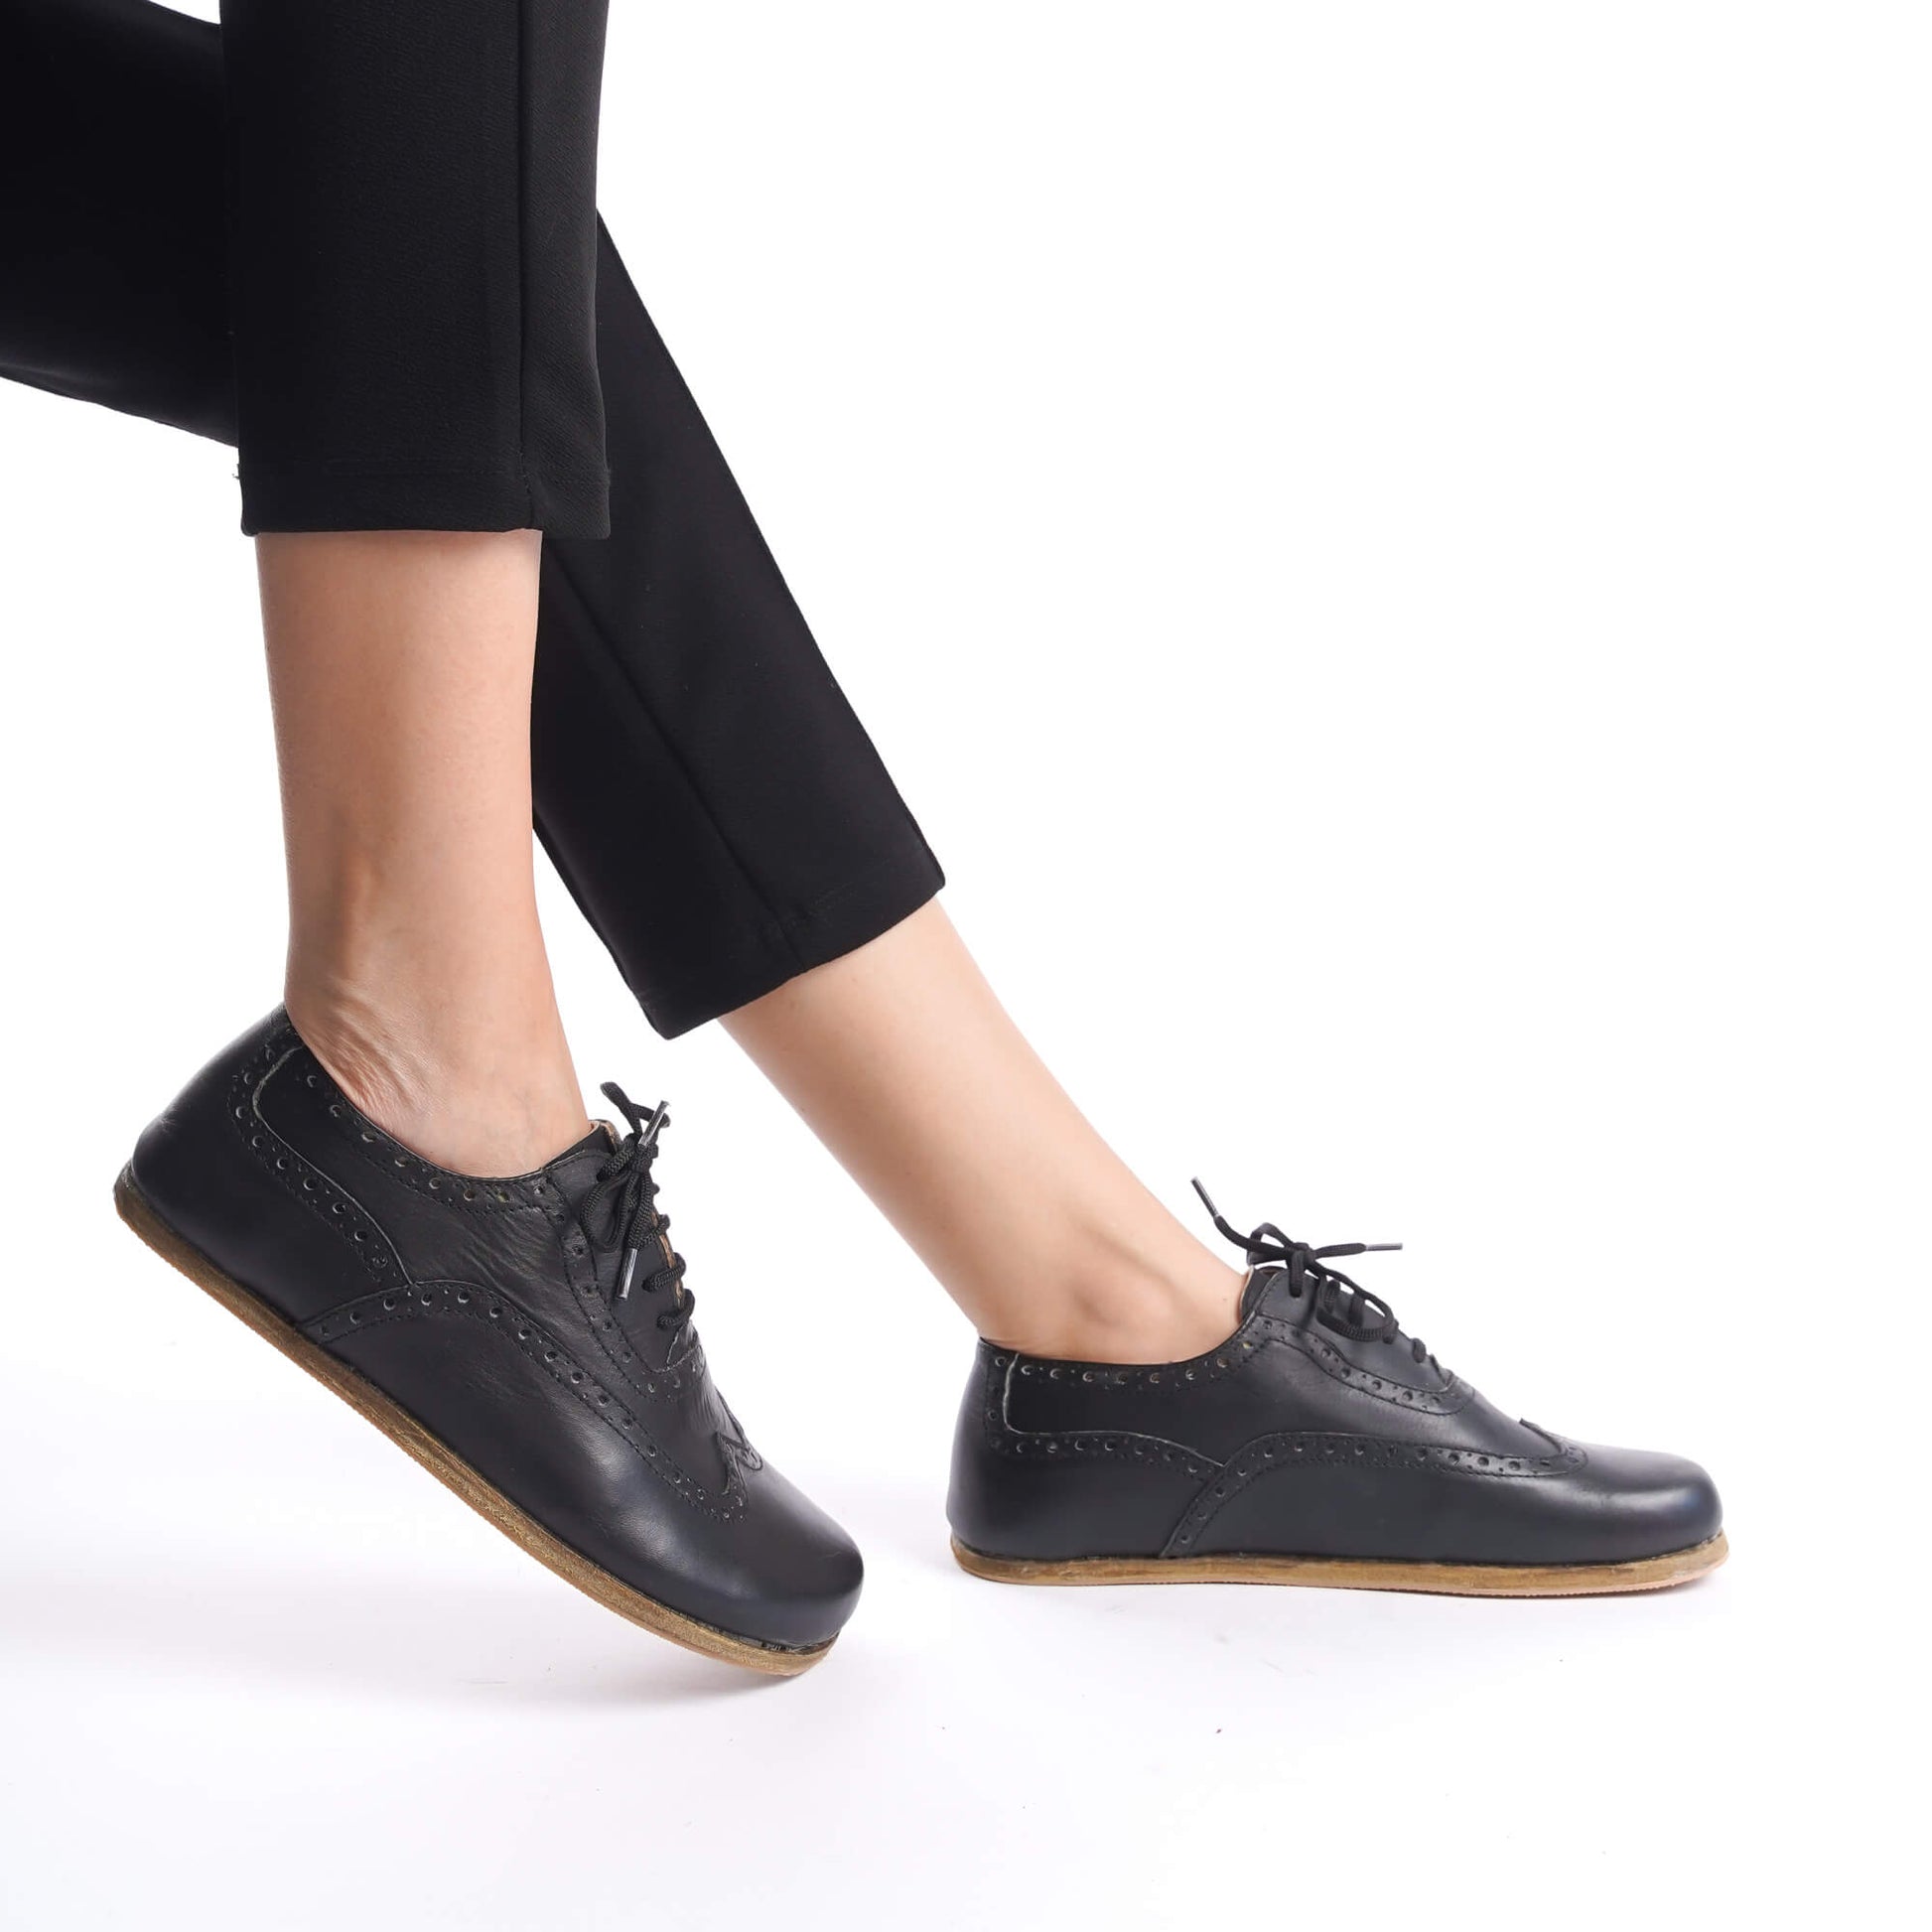 Close-up view of Doris Leather Barefoot Women's Oxfords in Black, perfect for elegant outfits